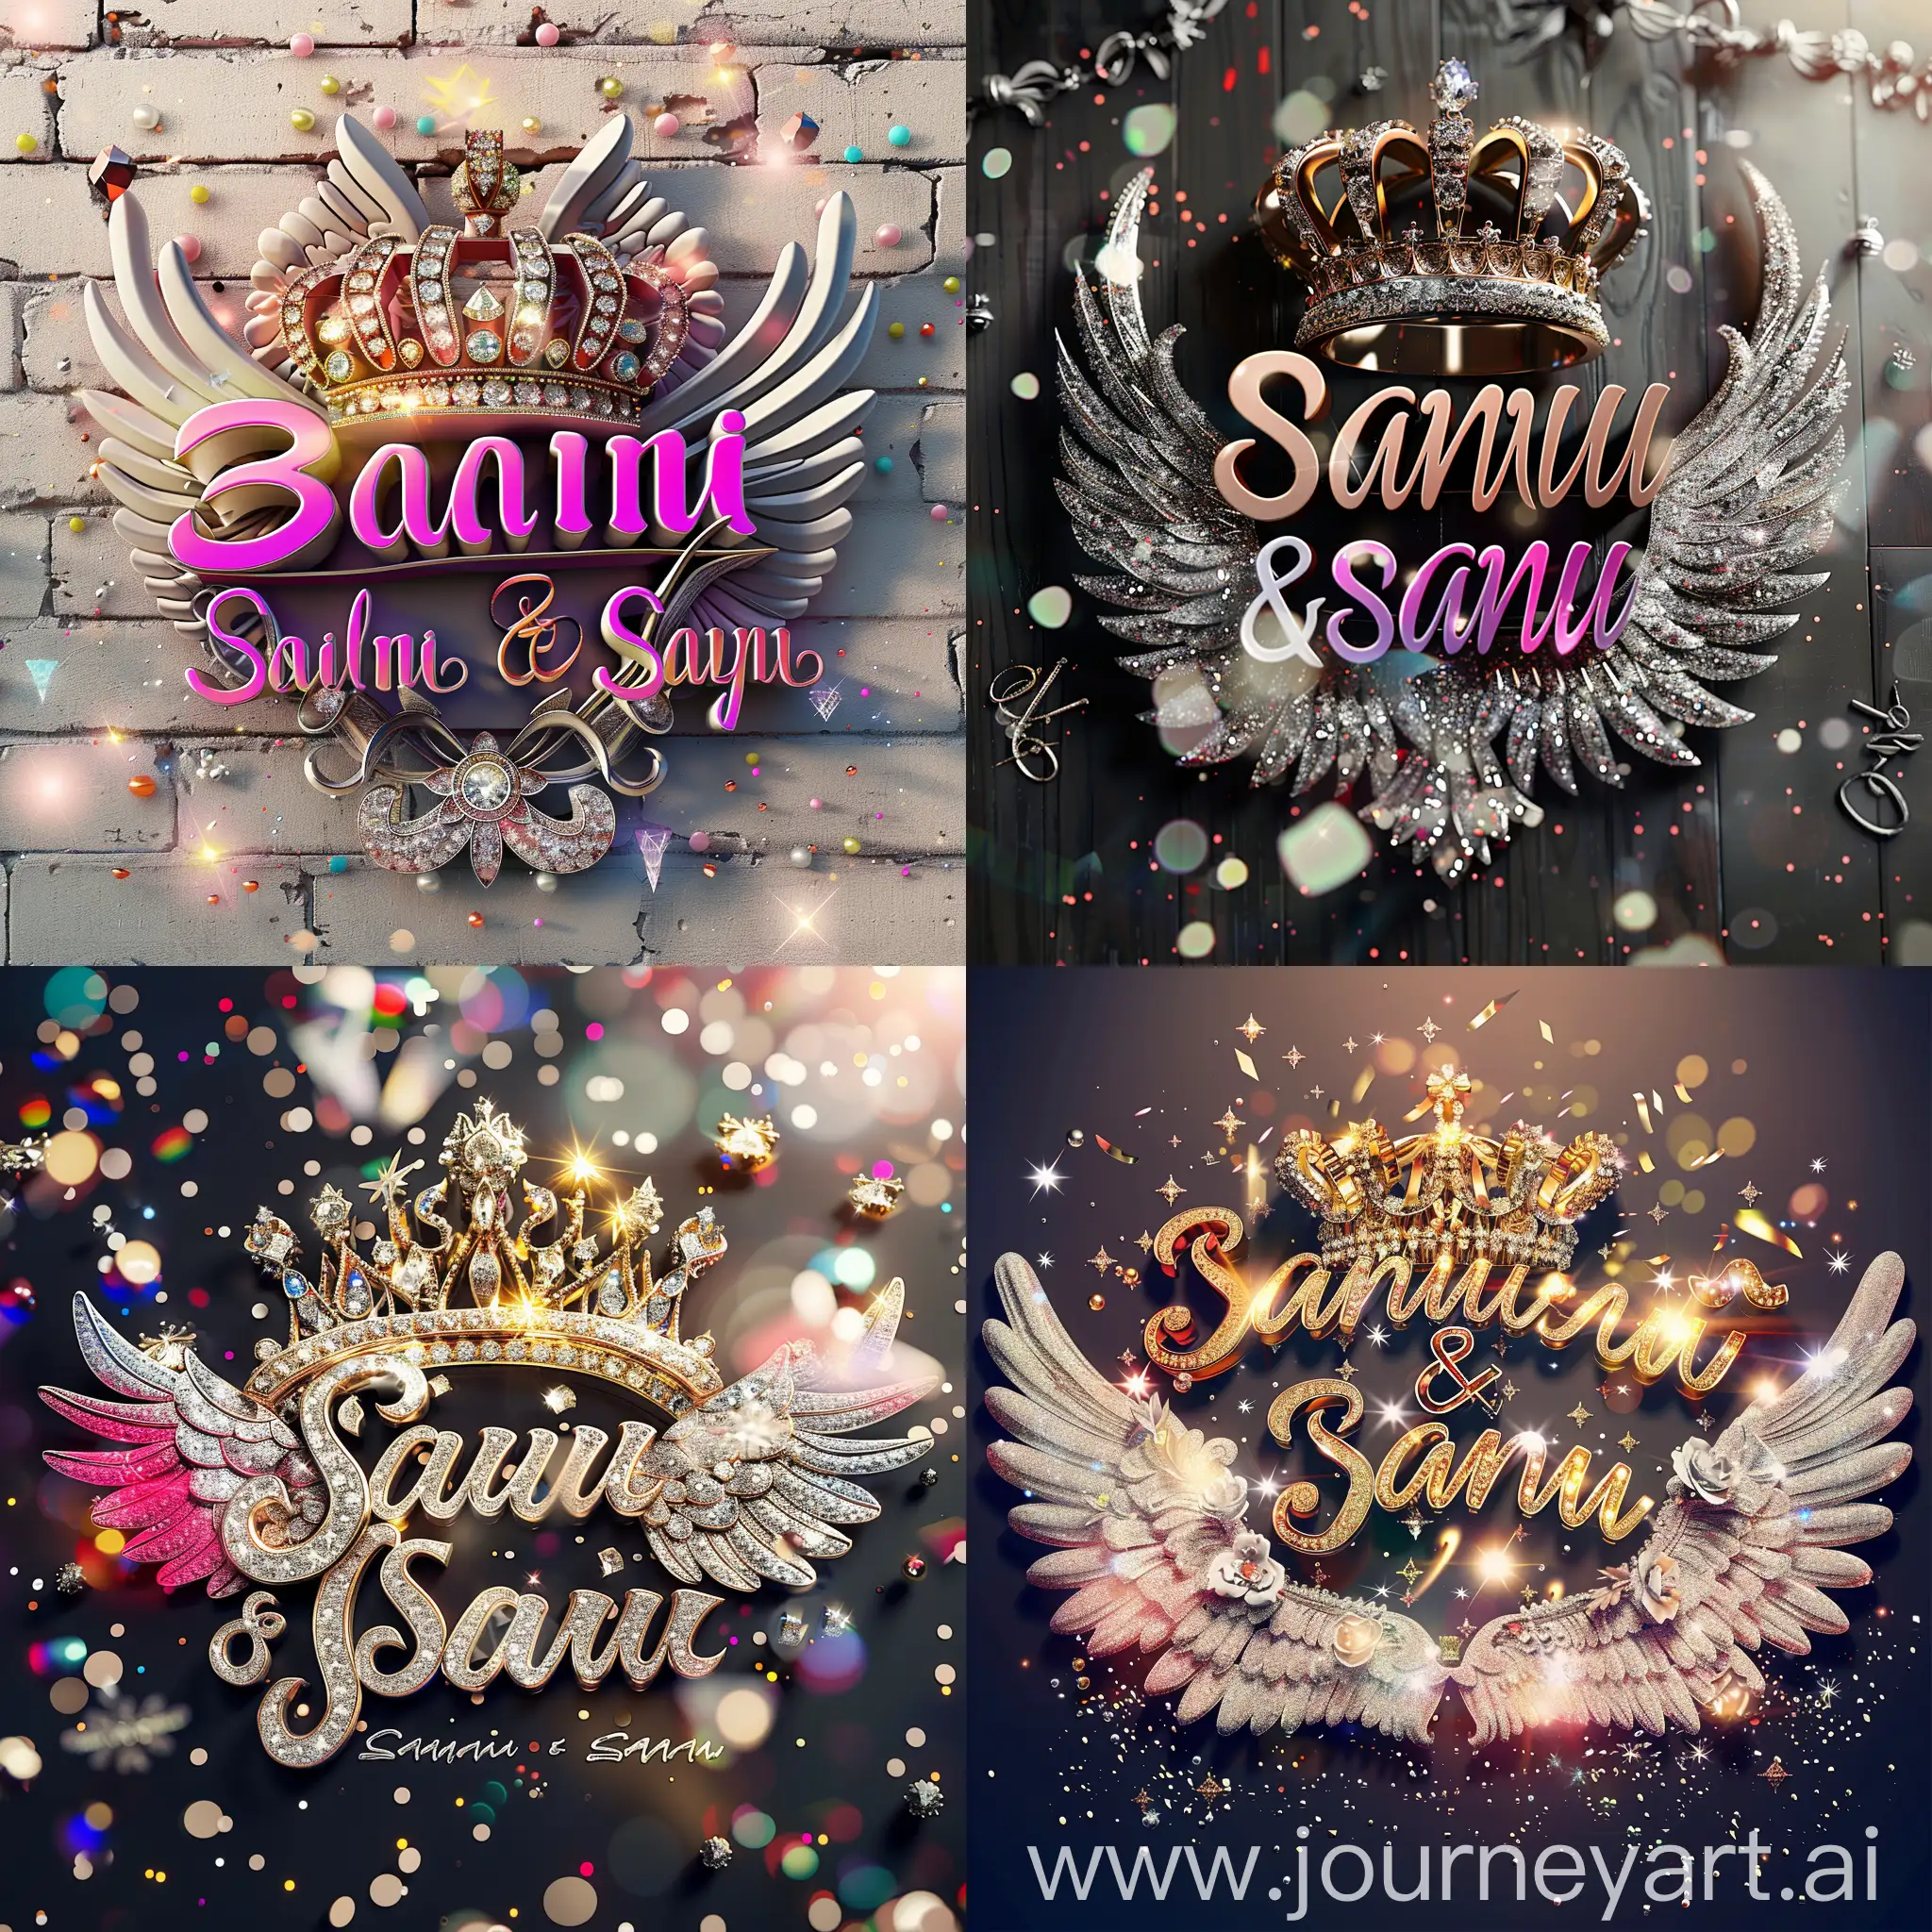 Elegant 3D typography with the name. " Saani & sanu  " with an elegant crown and fine diamonds with sparkles of bright colors and angel wings, photo, typography, vibrantv0.1, graffiti, illustration, photo, product, fashion, poster